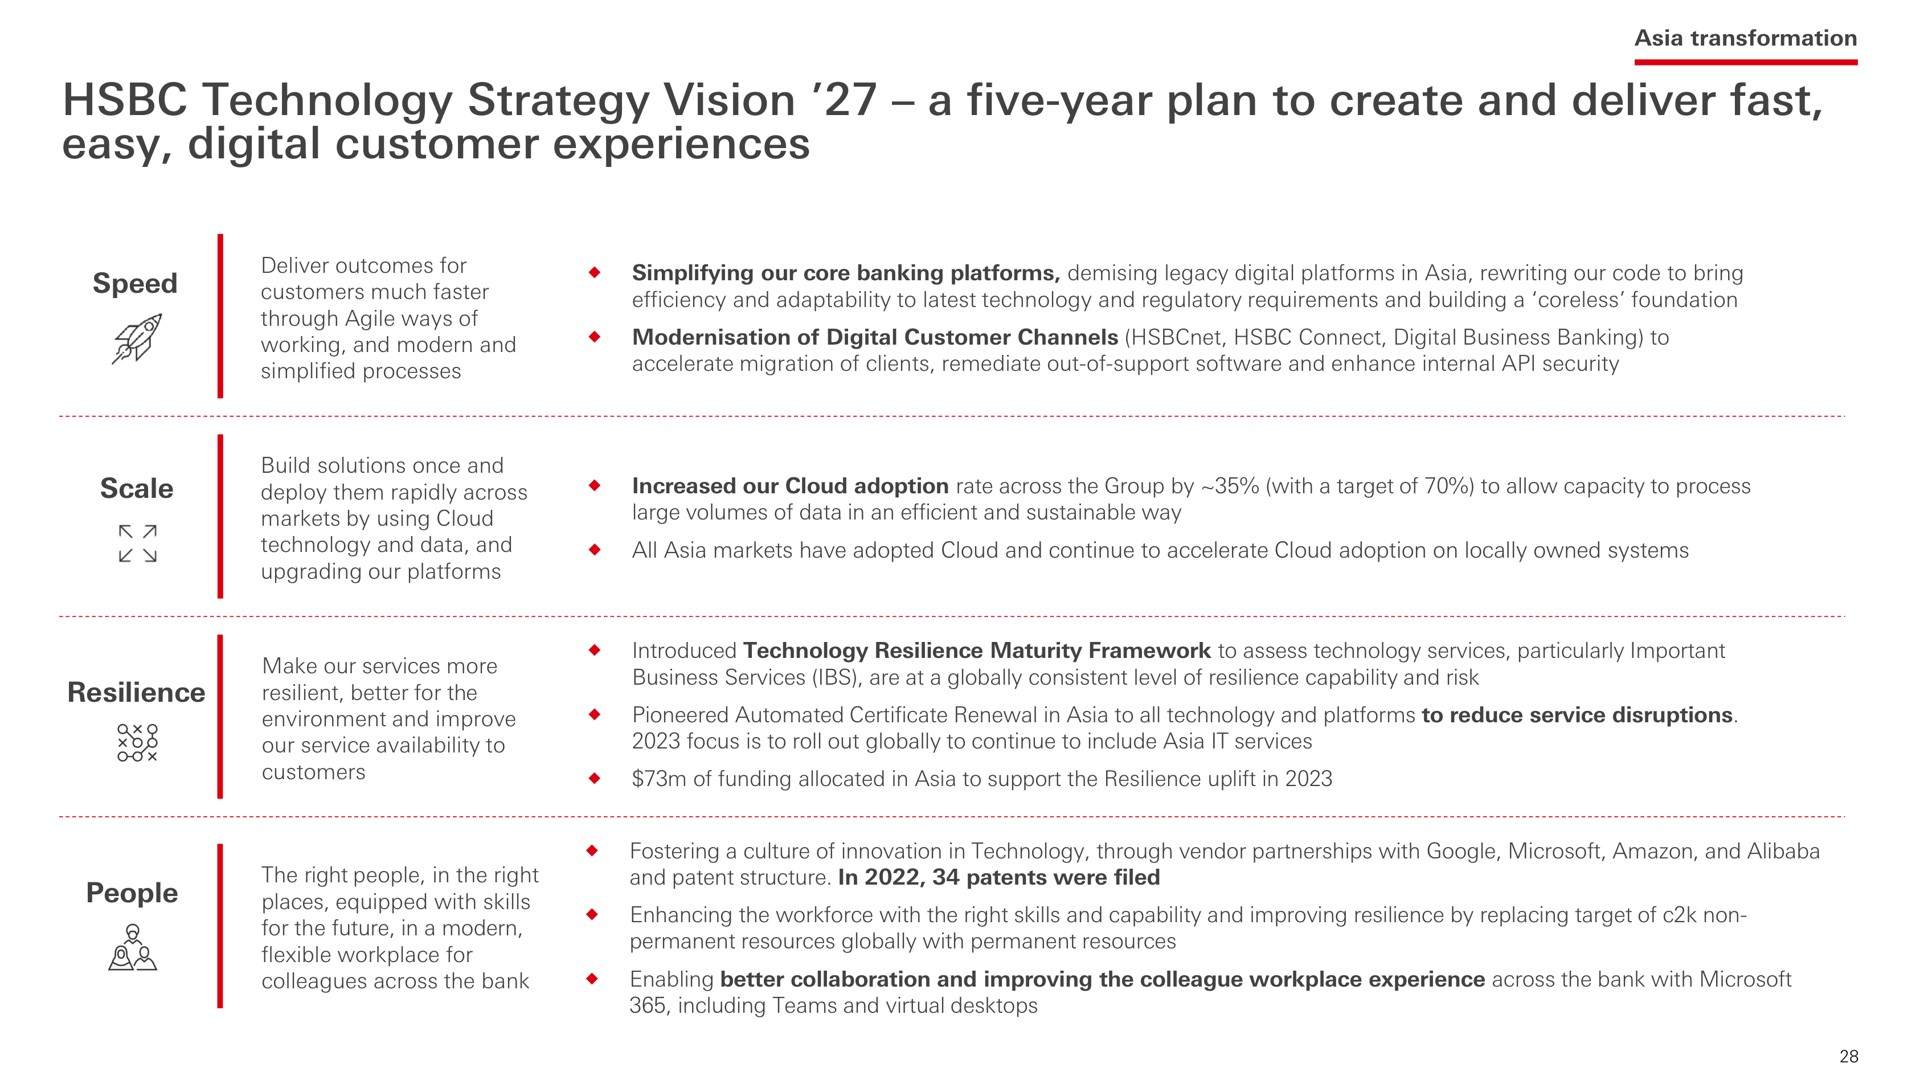 technology strategy vision a five year plan to create and deliver fast easy digital customer experiences | HSBC